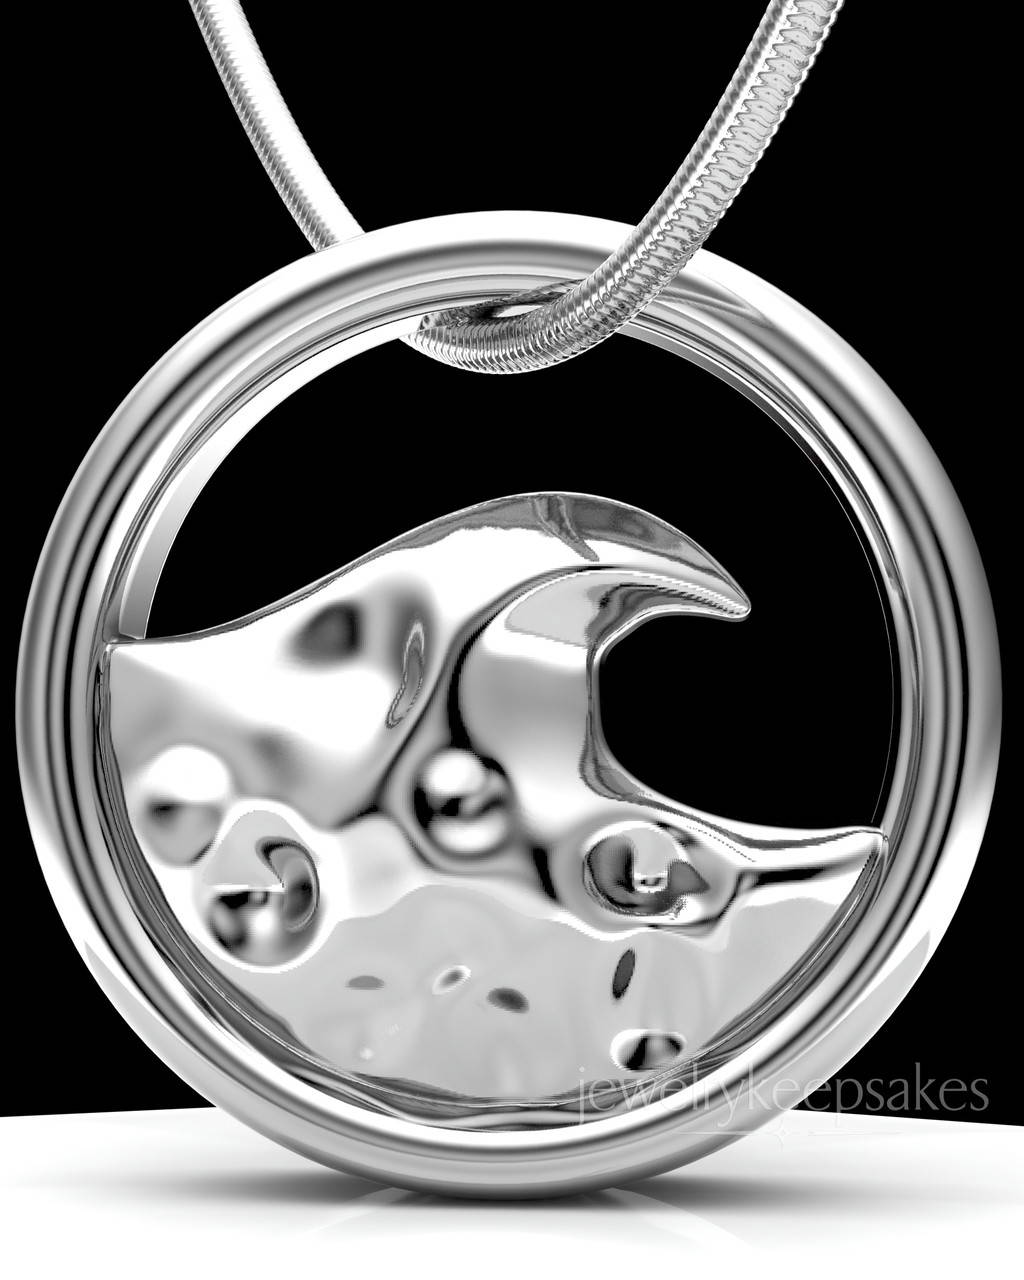 Ocean Waves Sterling Silver Permanently Sealed Jewelry